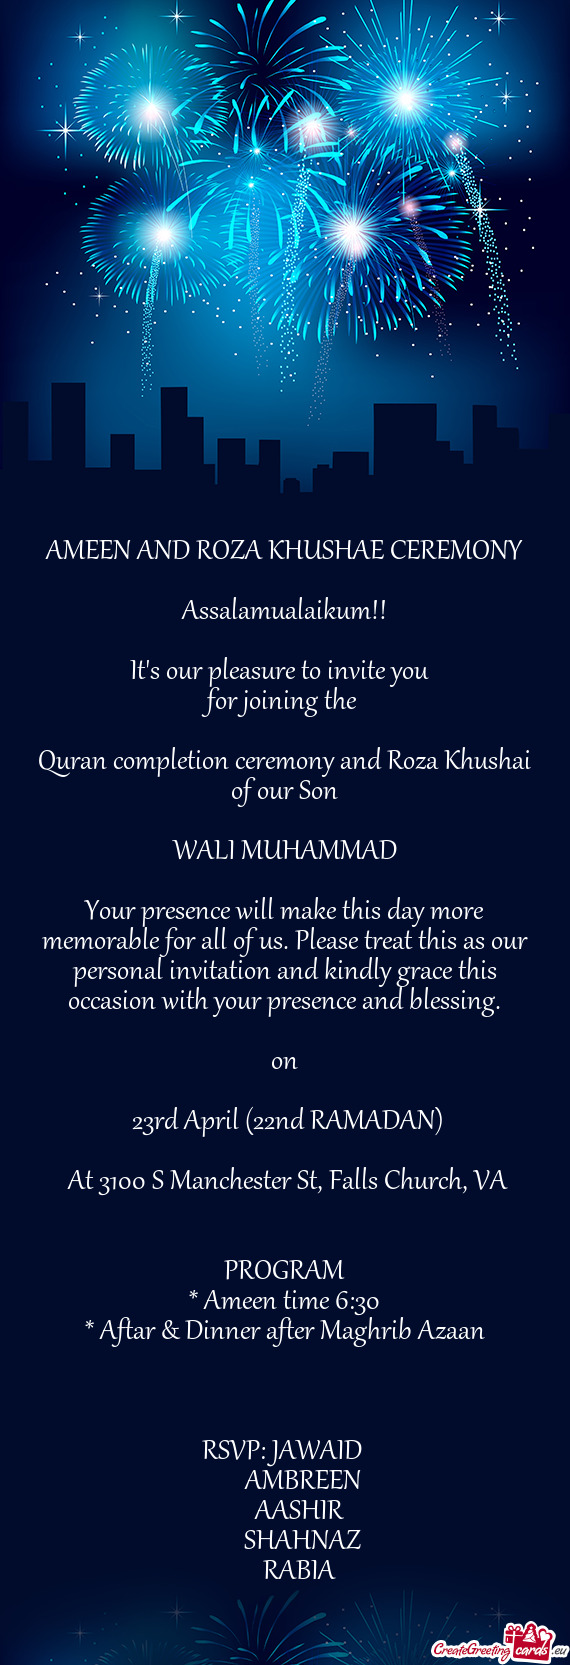 Quran completion ceremony and Roza Khushai of our Son